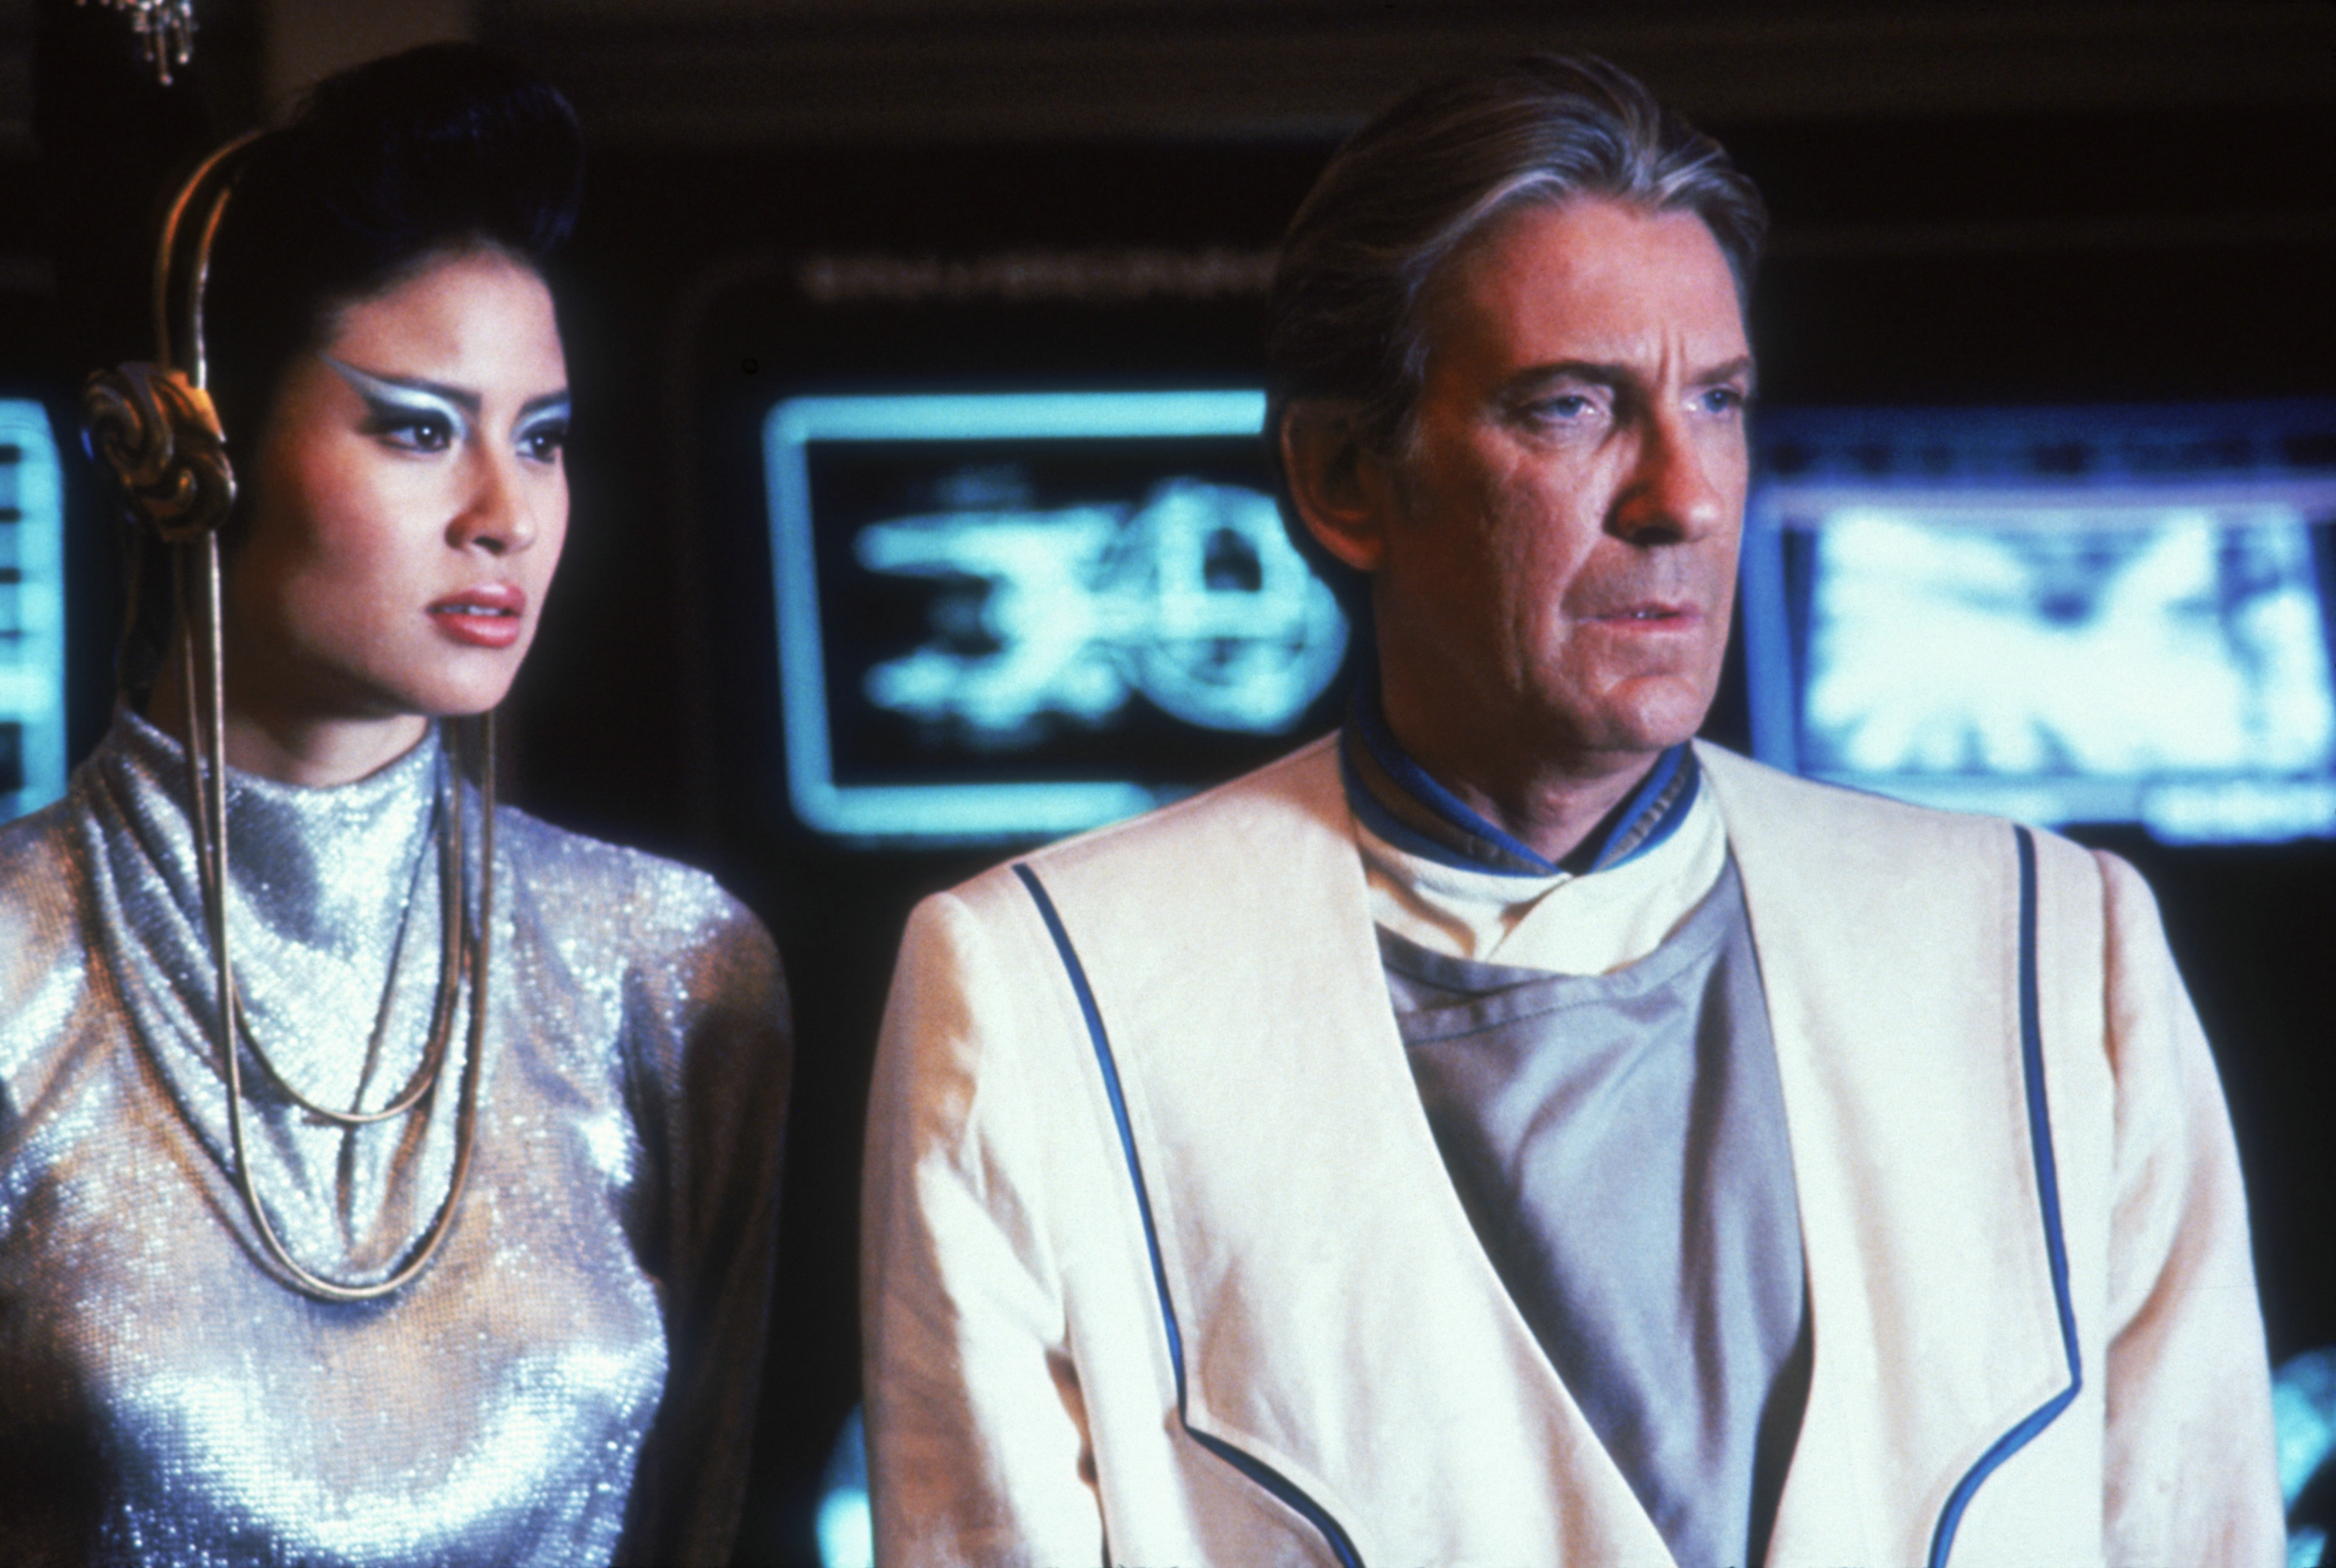 David Warner and Cynthia Gouw in Star Trek V: The Final Frontier (1989)